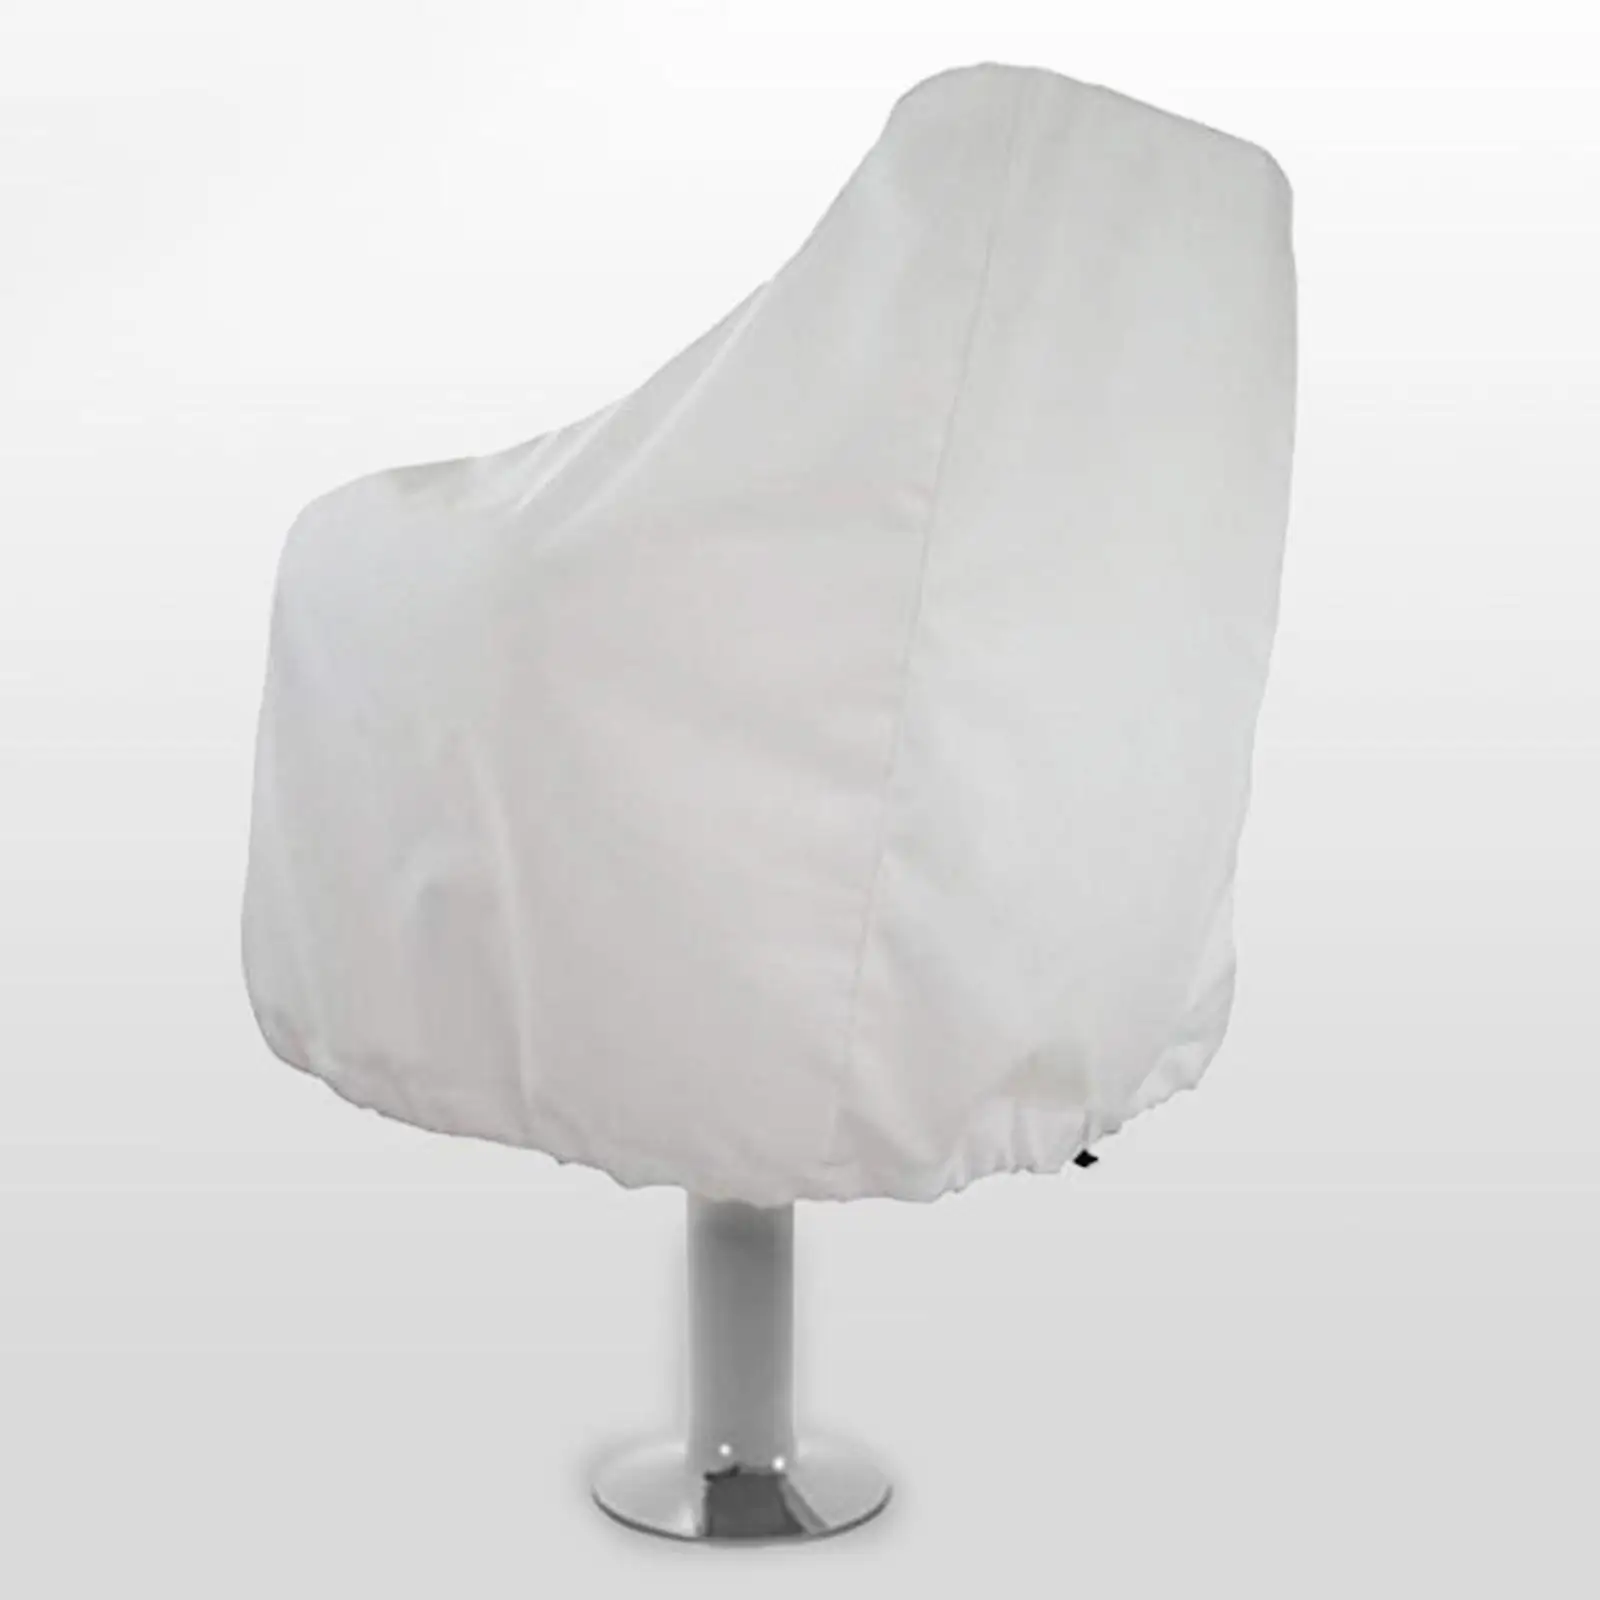 Boat Seat Cover, Collapsible Waterproof, Weatherproof High-performance